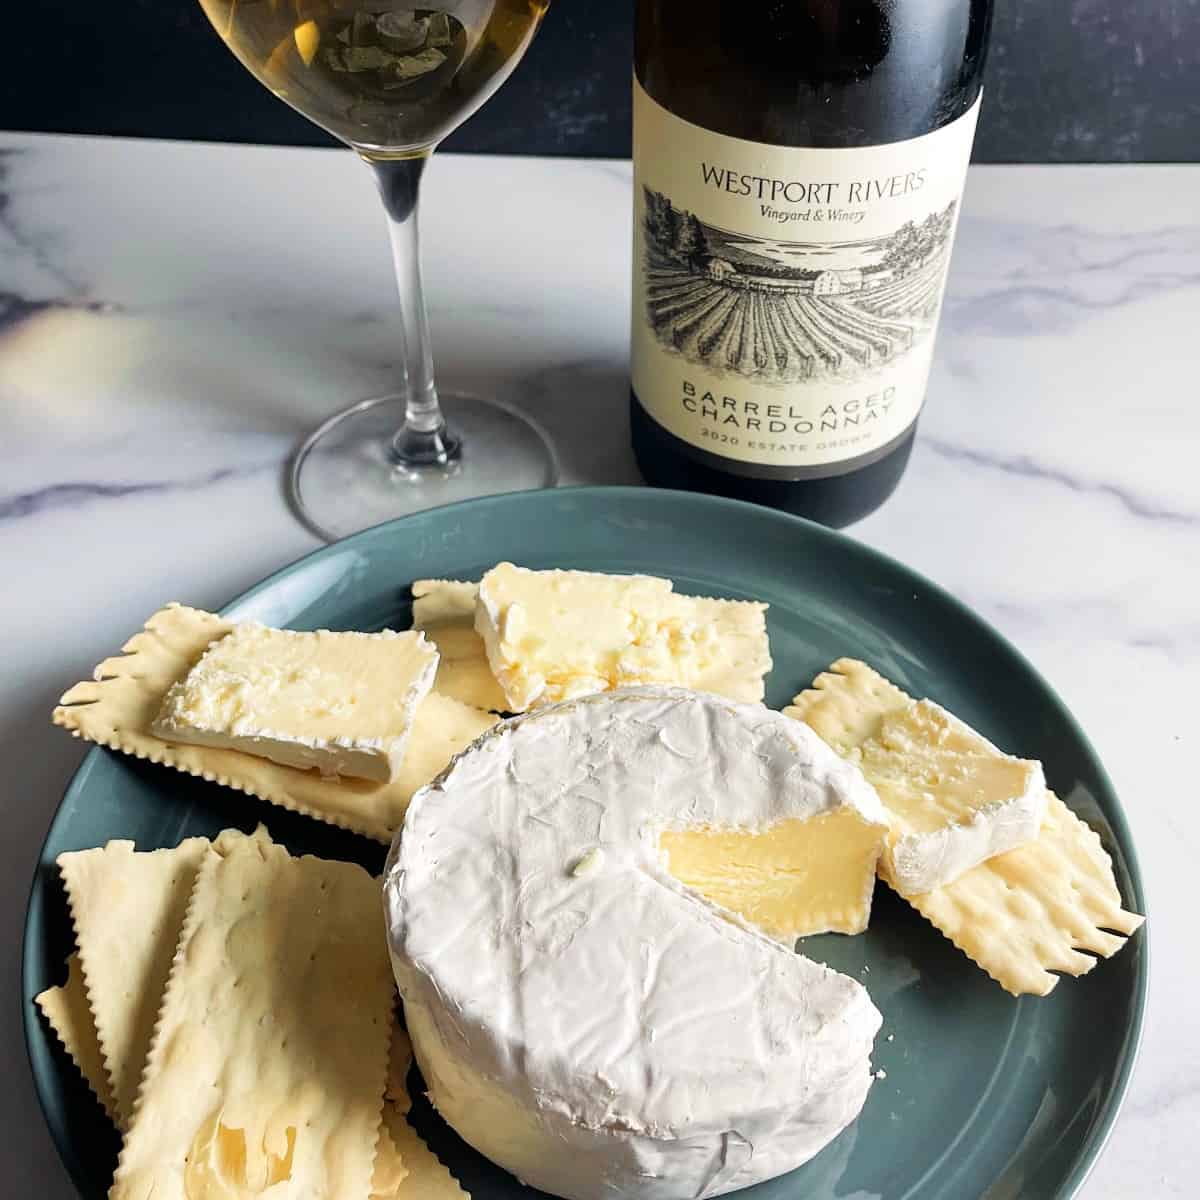 a wheel of brie on a plate, with a portion cut out and served on crackers. white wine in the background.